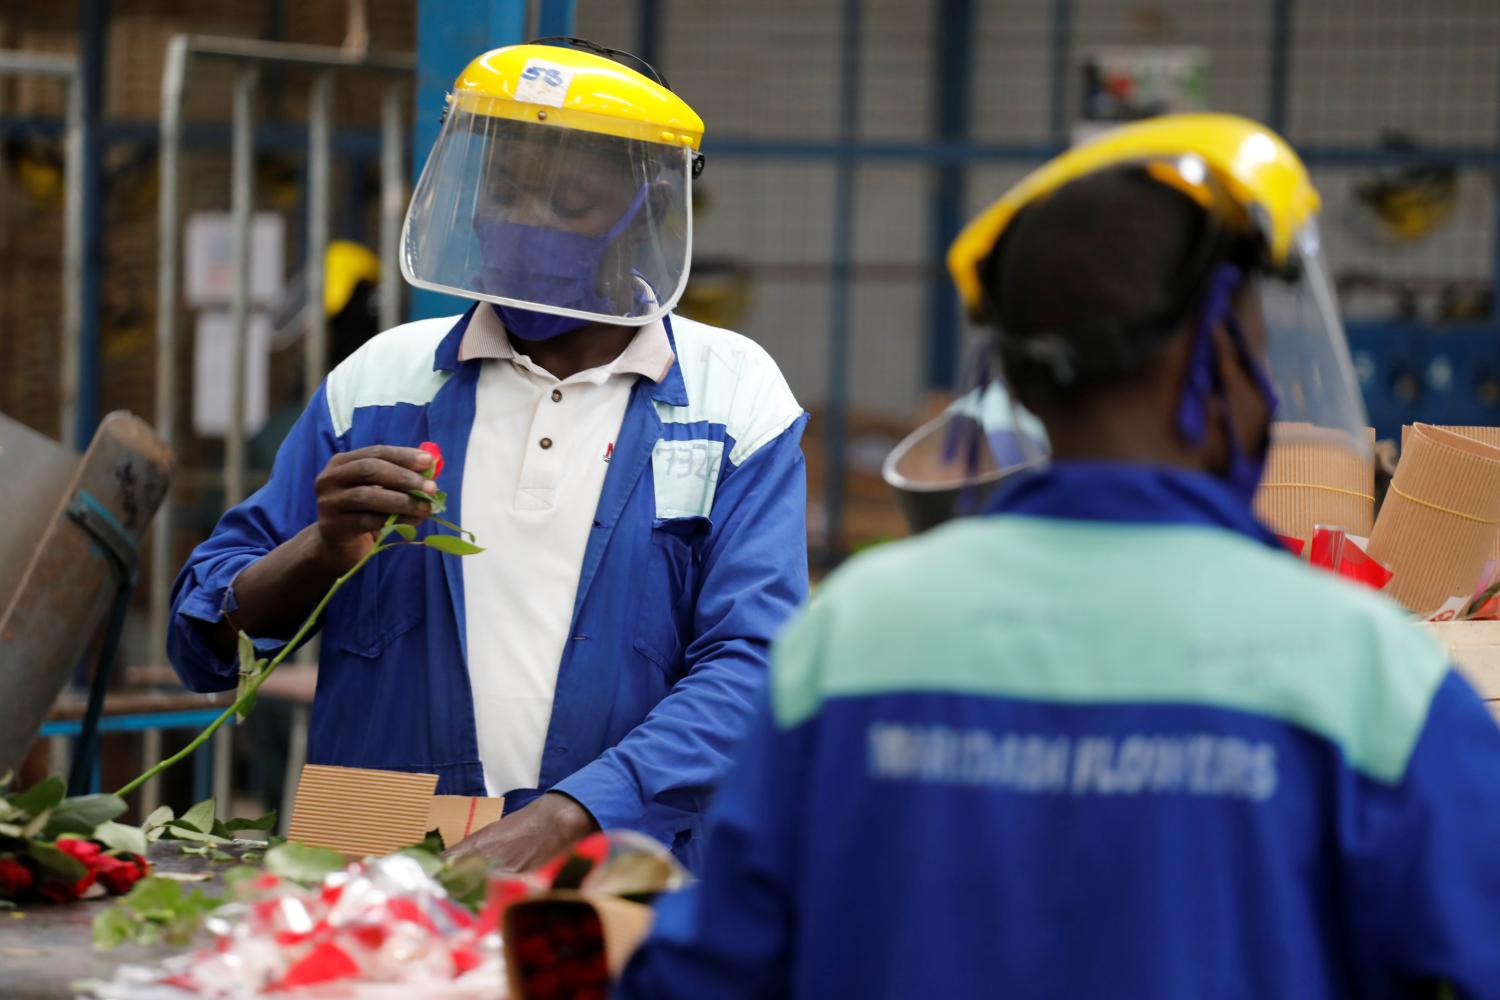 Workers sort roses on the packing line while wearing protective equipment to help fight against the spread of the coronavirus disease (COVID-19) at the Maridadi flower farm in Naivasha, Kenya, July 20, 2020. Picture taken July 20, 2020. REUTERS/Baz Ratner